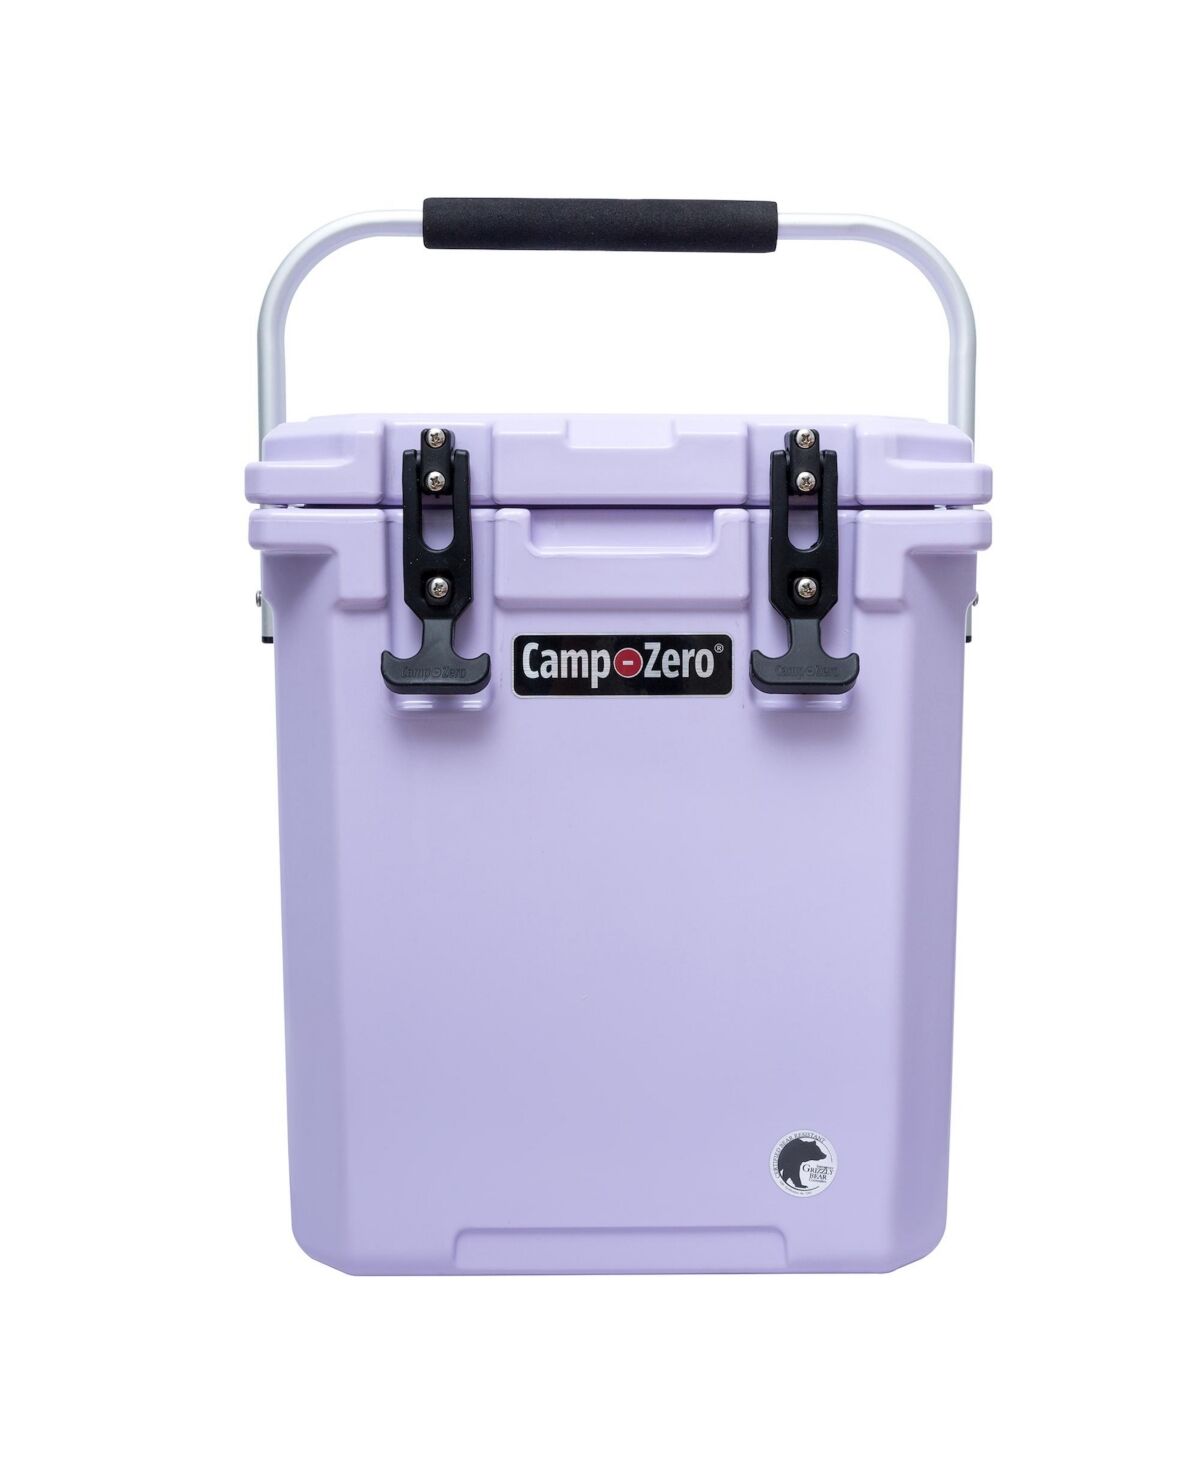 Camp-zero 16 Tall   16.9 Qt. Premium Cooler with 2 Molded-In Cup Holders and Folding Aluminum Comfort Grip Handle   Sky Blue - Lavender